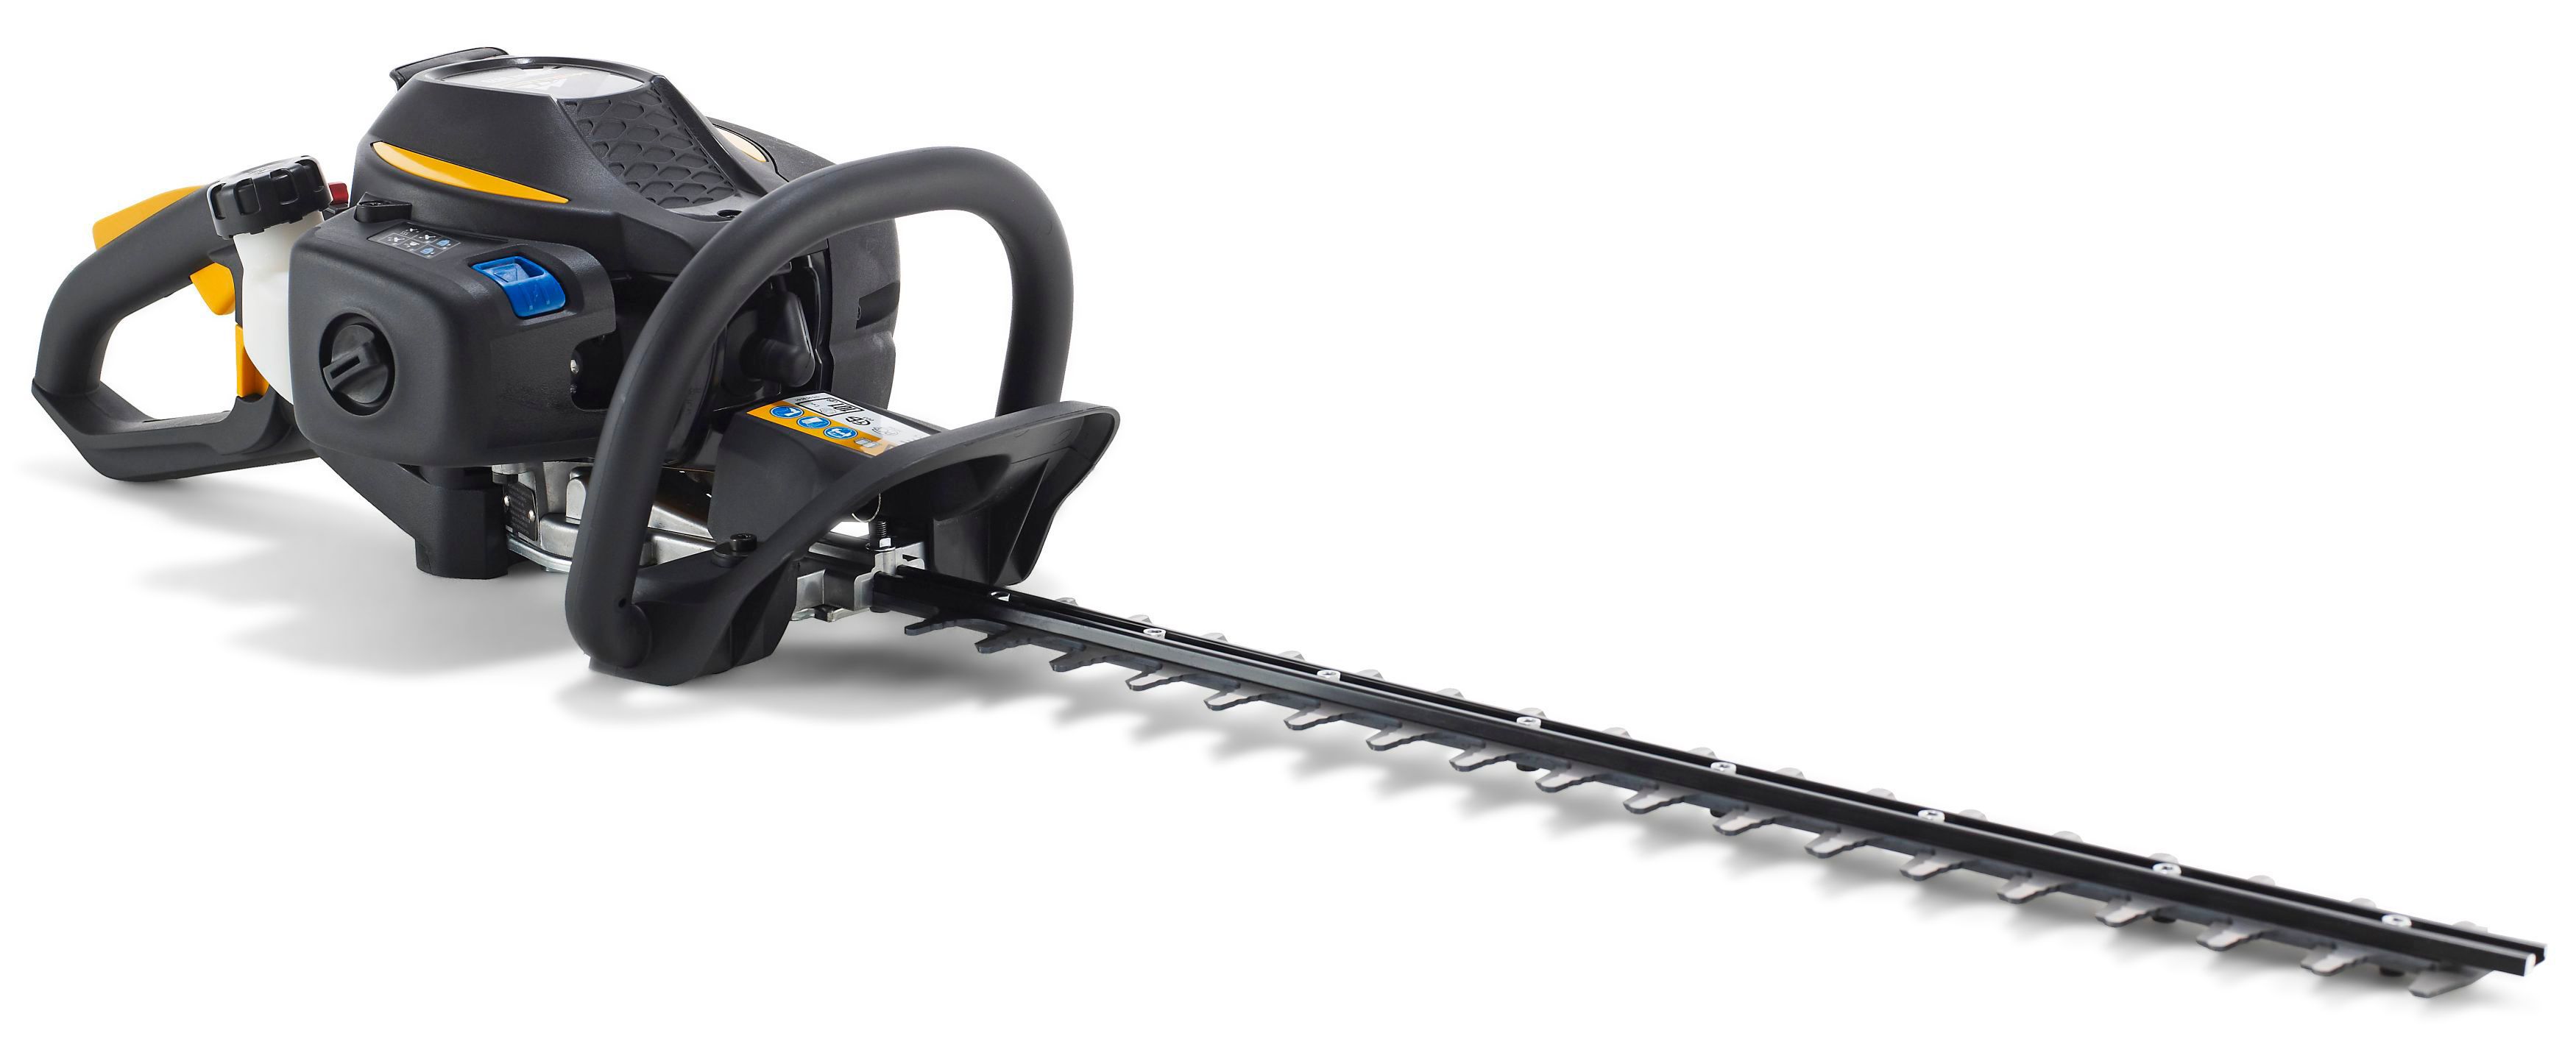 McCulloch Hedge trimmer